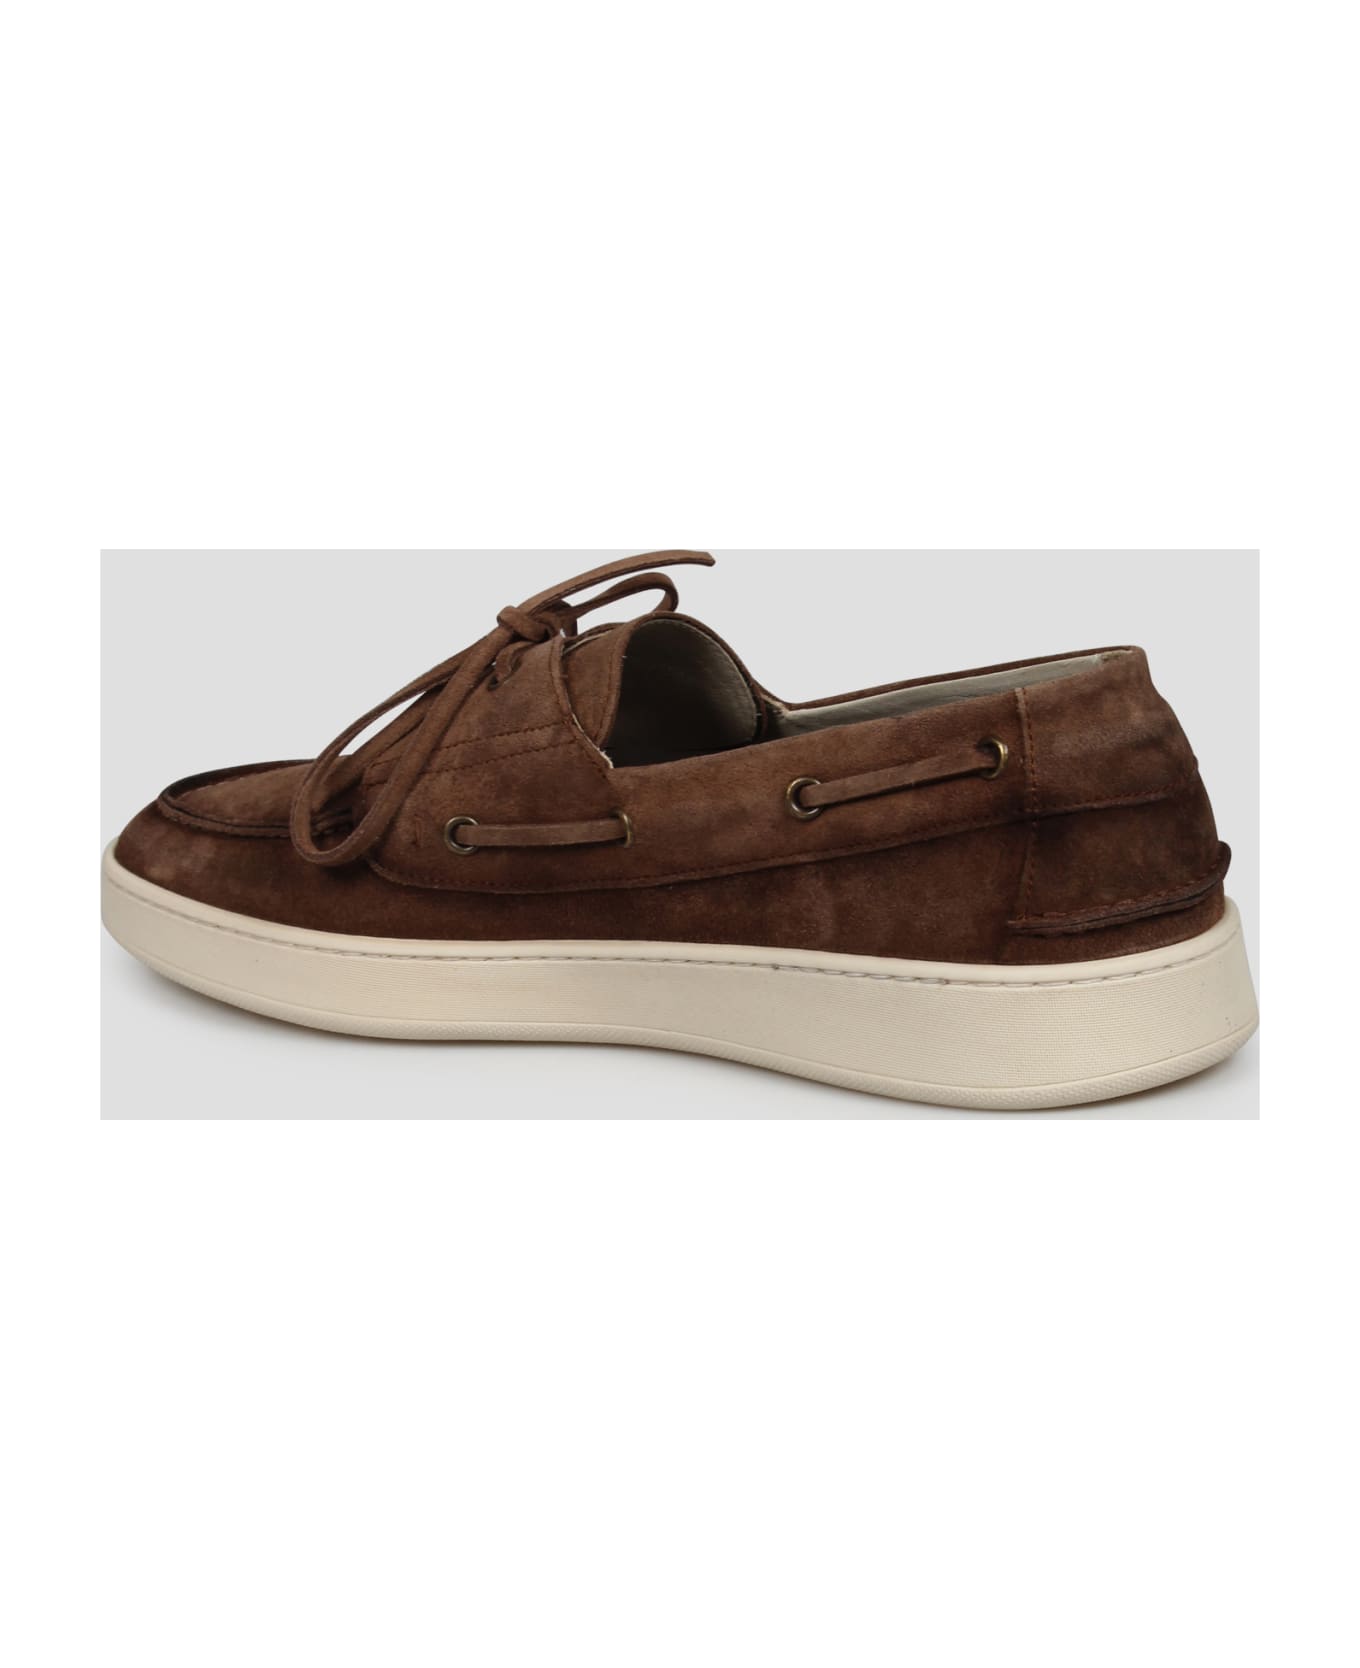 Corvari Suede Boat Loafers - Brown